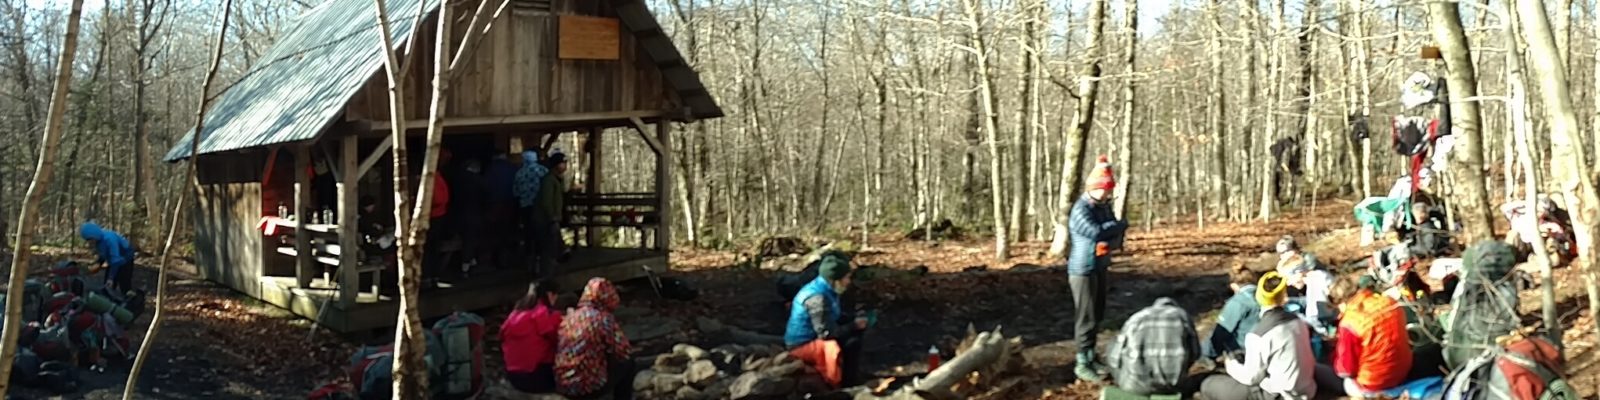 Group of hikers sitting outside the Stratton Mountain shelter in late fall